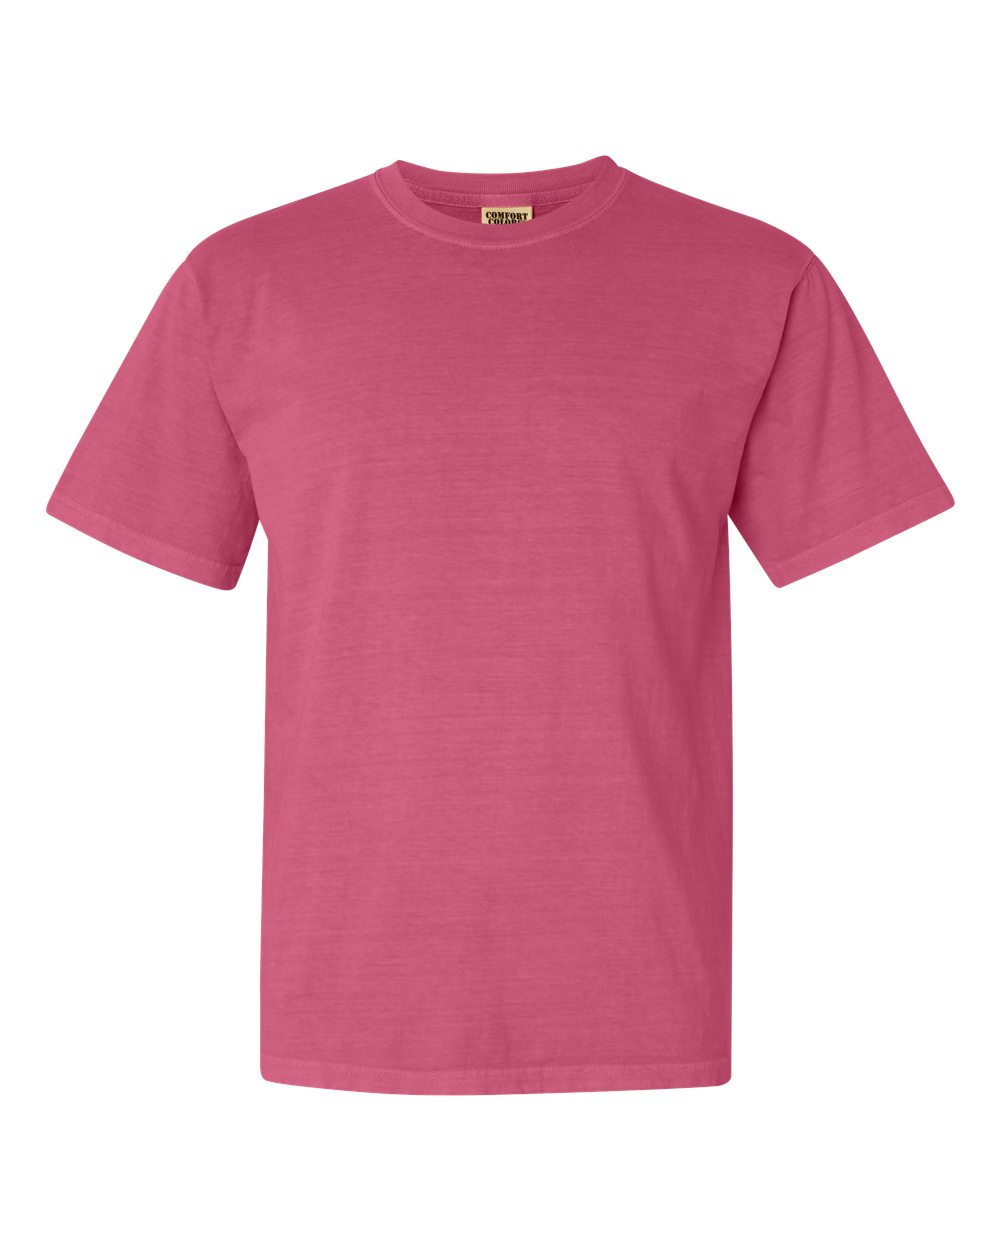 Comfort Colors Garment-Dyed Tee (1717) in Crunchberry